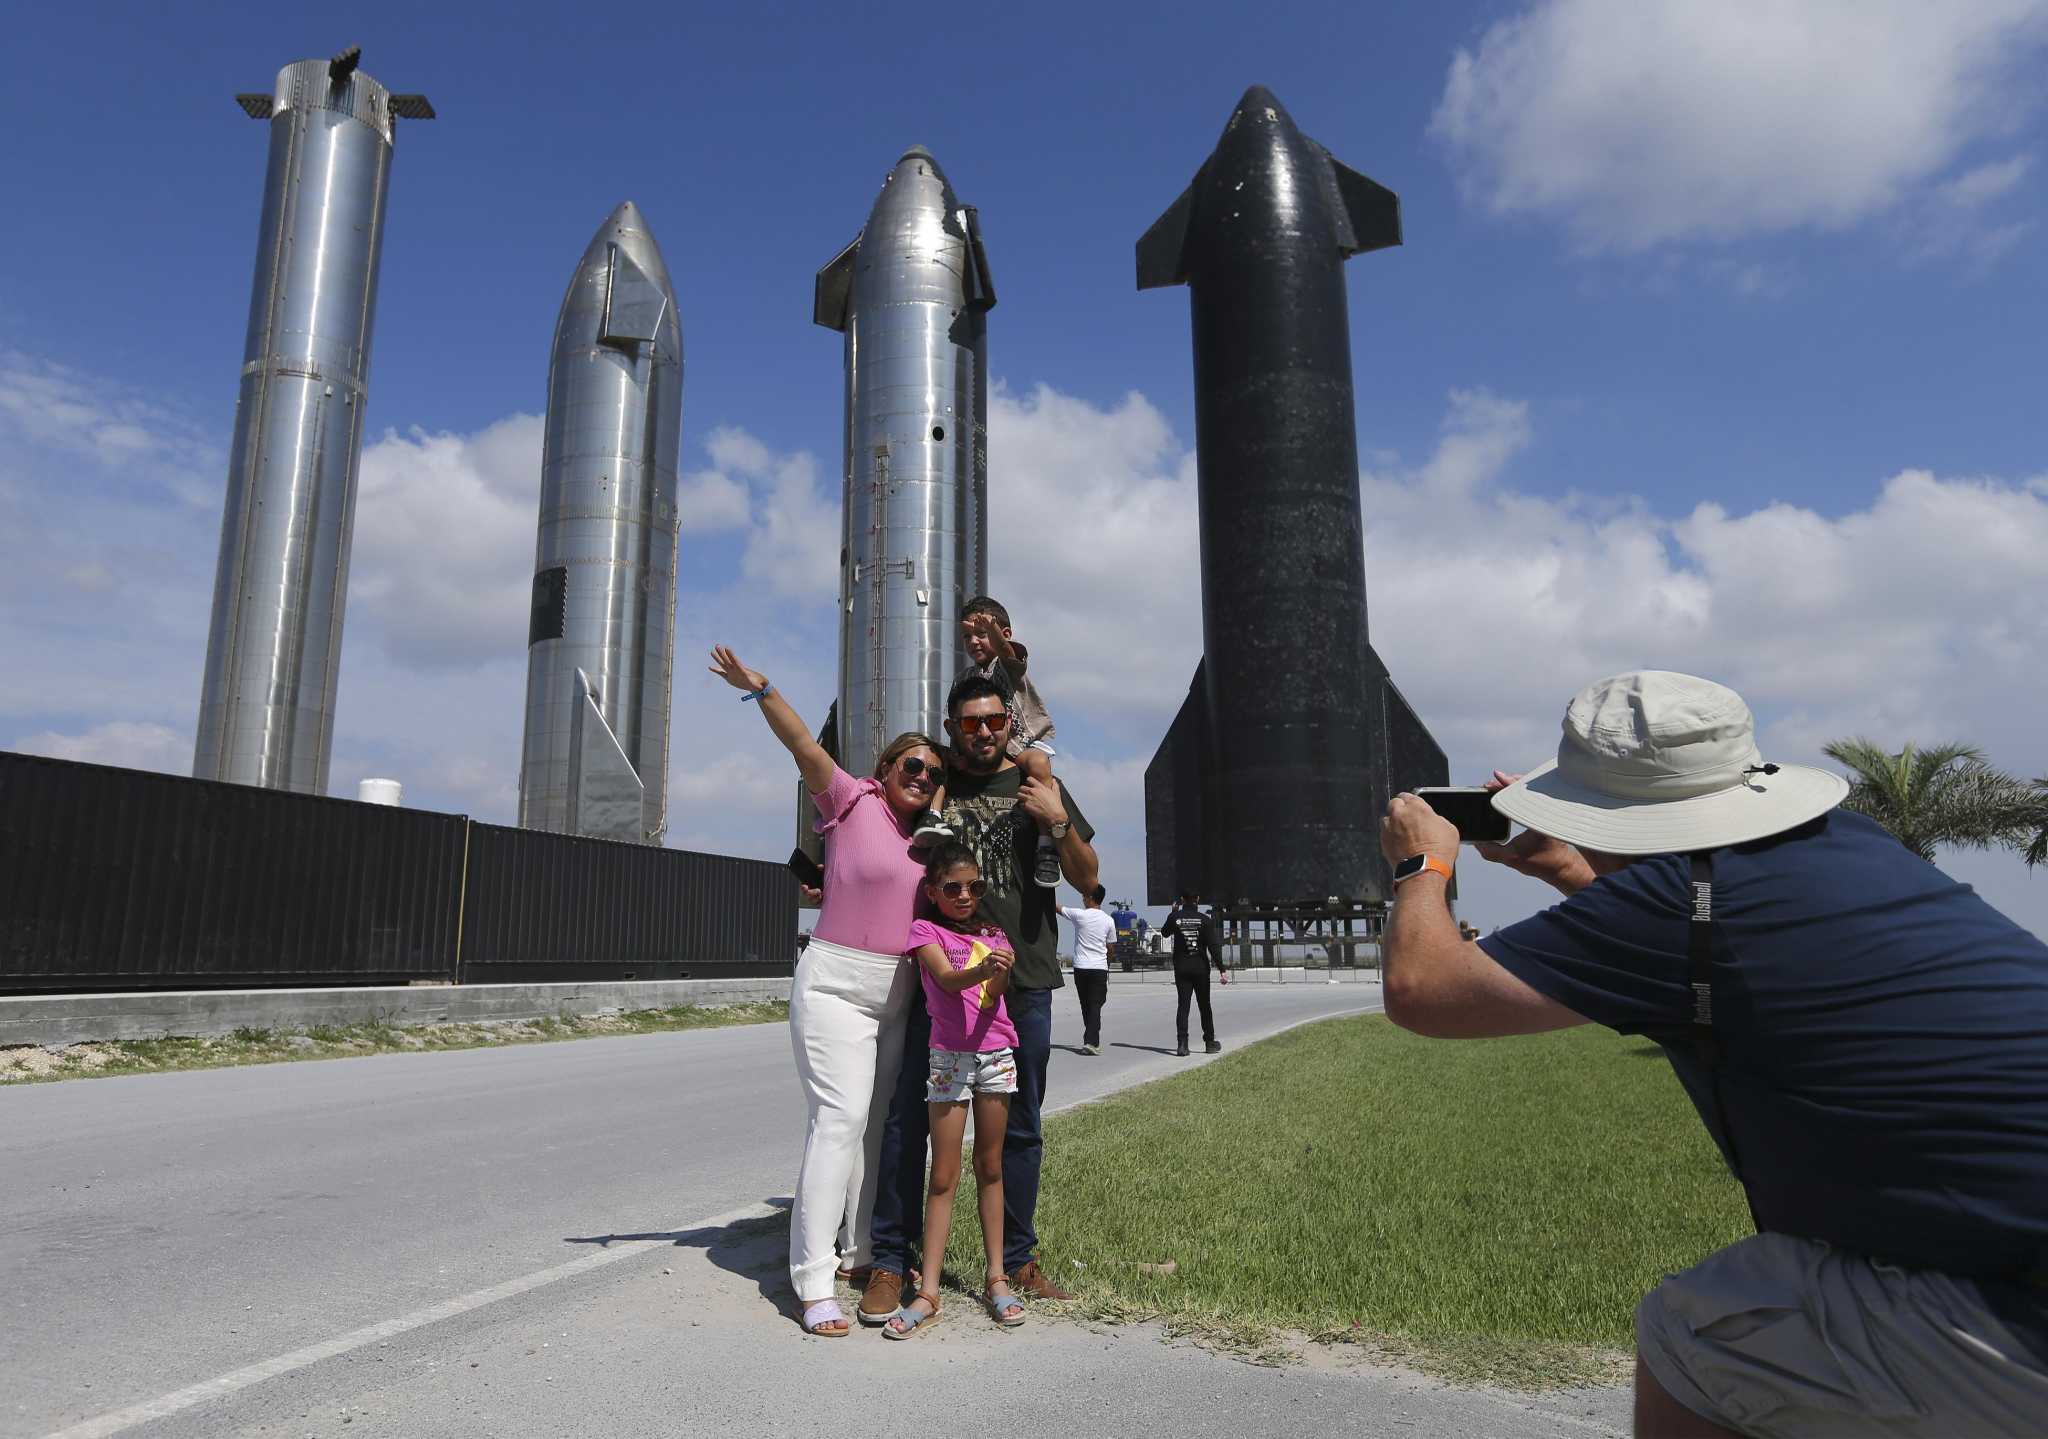 Boca Chica loses momentum as SpaceXs Gateway to Mars pic